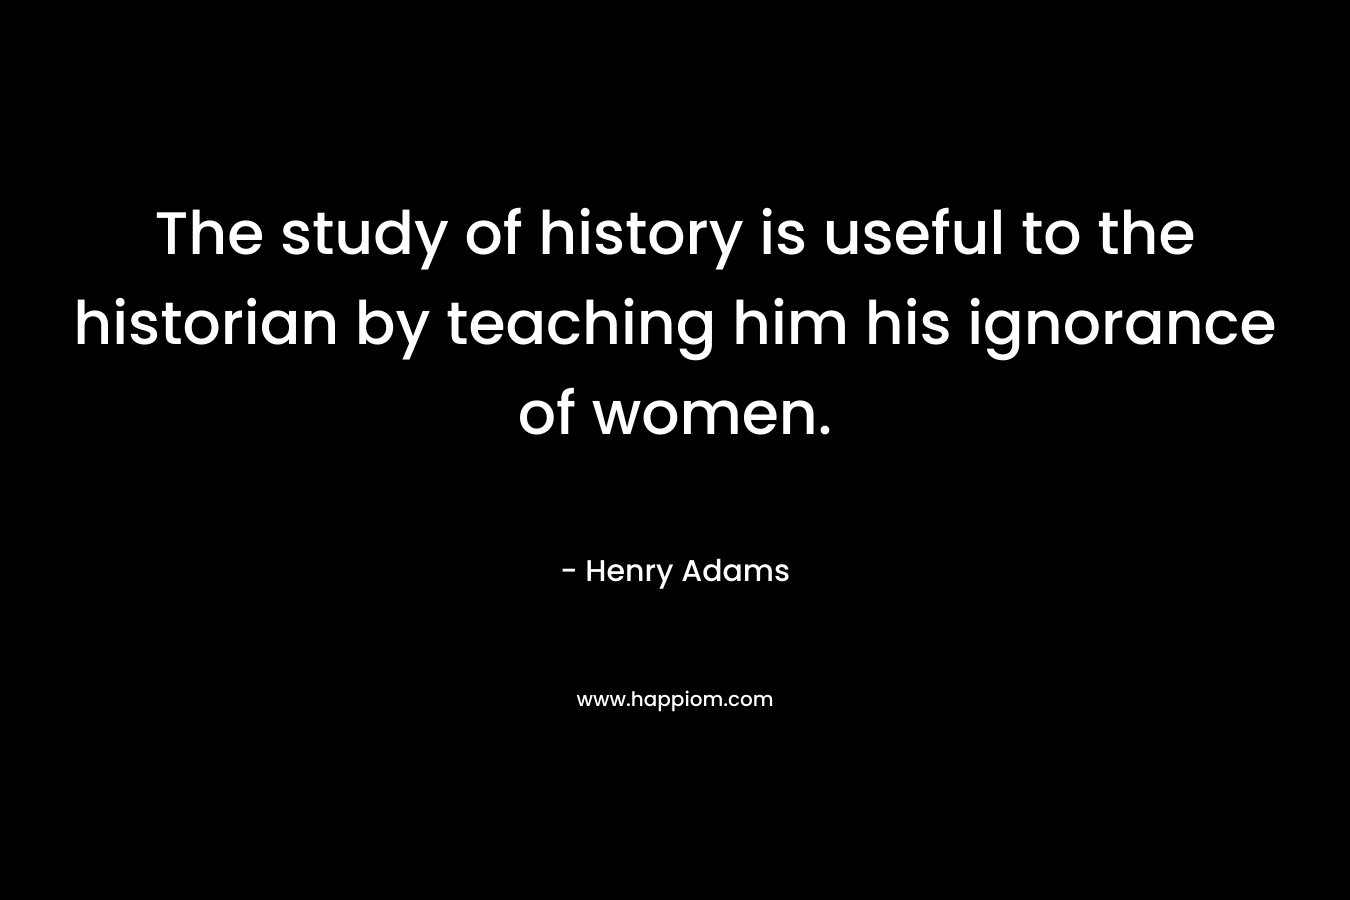 The study of history is useful to the historian by teaching him his ignorance of women. – Henry Adams